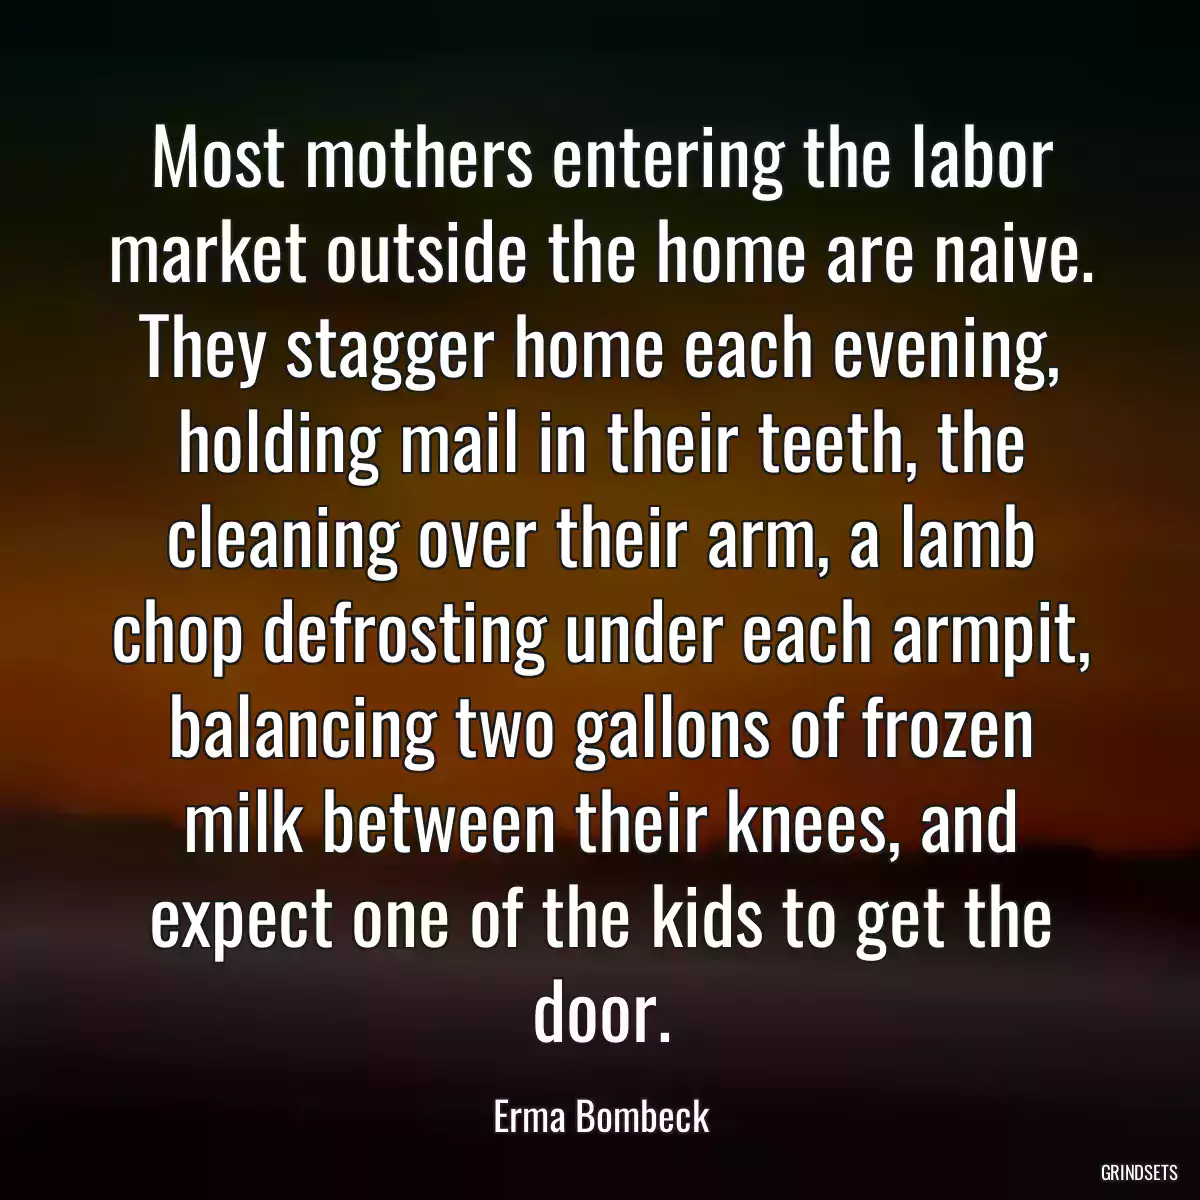 Most mothers entering the labor market outside the home are naive. They stagger home each evening, holding mail in their teeth, the cleaning over their arm, a lamb chop defrosting under each armpit, balancing two gallons of frozen milk between their knees, and expect one of the kids to get the door.